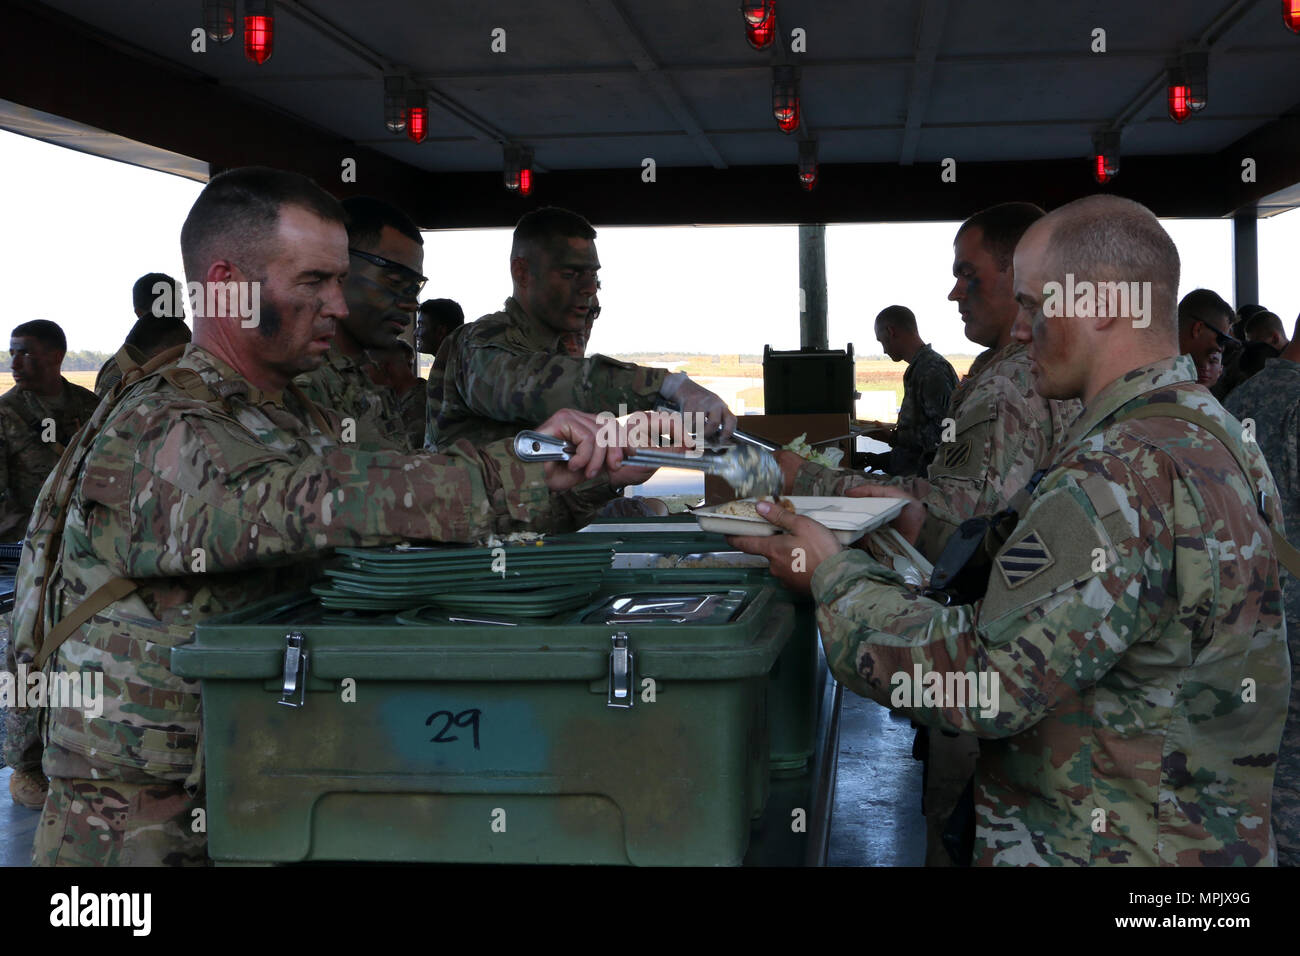 Leaders (left) of 6th Squadron, 8th Cavalry Regiment, 2nd Infantry Brigade Combat Team, 3rd Infantry Division serve dinner to their Soldiers during a mounted gunnery range March 8, 2017 at Fort Stewart, Ga. 6-8 Cav. Soldiers qualified with mounted weapons in preparation for a squadron field training exercise next month. (U.S. Army photo by Sgt. Robert Harris/Released) Stock Photo